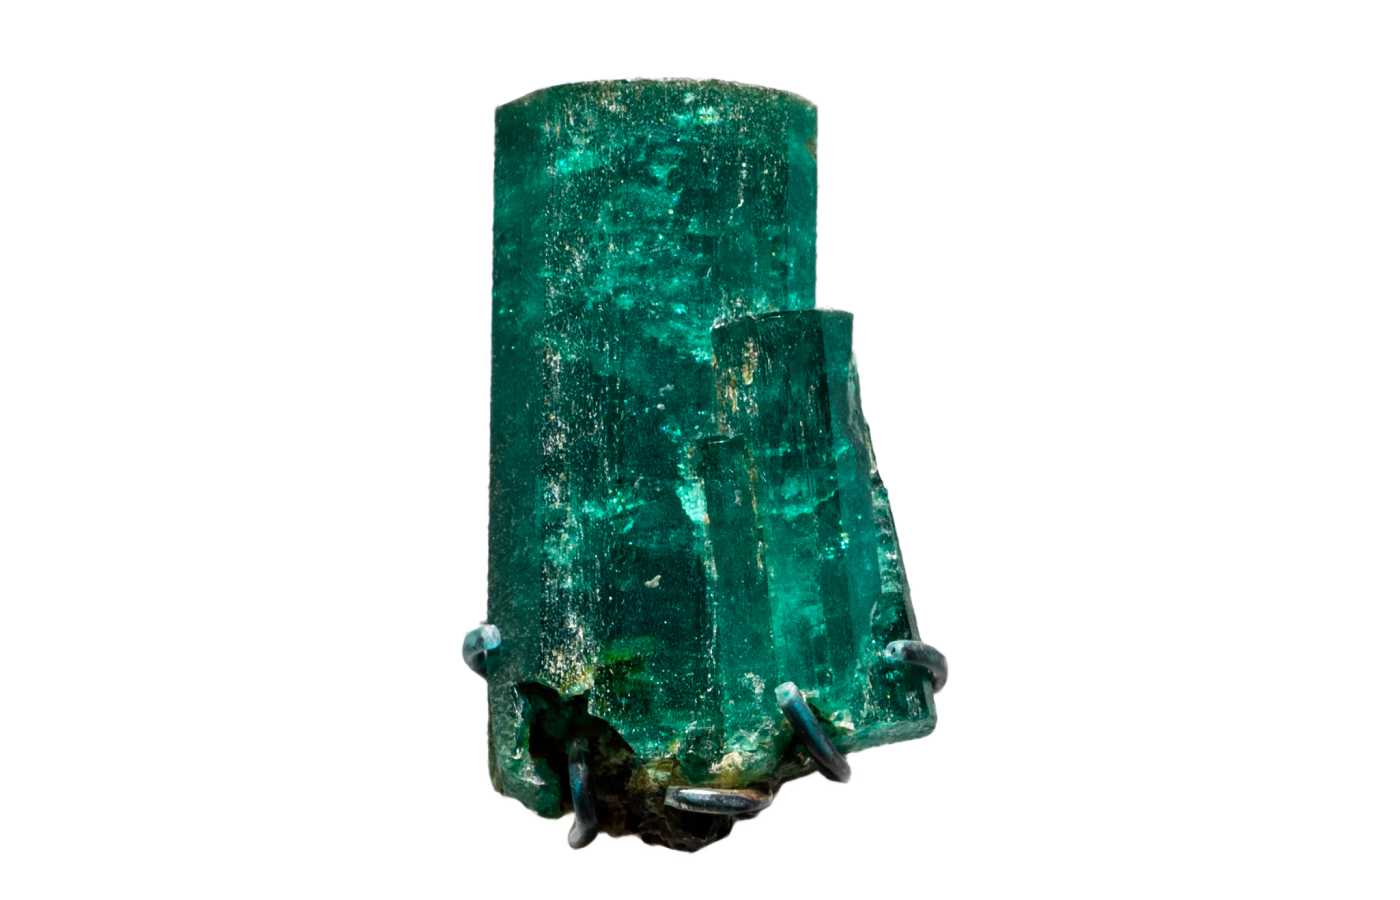 The 632-carat Patricia Emerald is a di-hexagonal, or 12-sided, crystal and is considered one of the great emeralds in the world. Found in Colombia in 1920, it was named after the mine owner’s daughter. On display in the Mignone Halls of Gems & Minerals, this specimen is one of few large emeralds that has been preserved uncut. D. Finnin/© AMNH